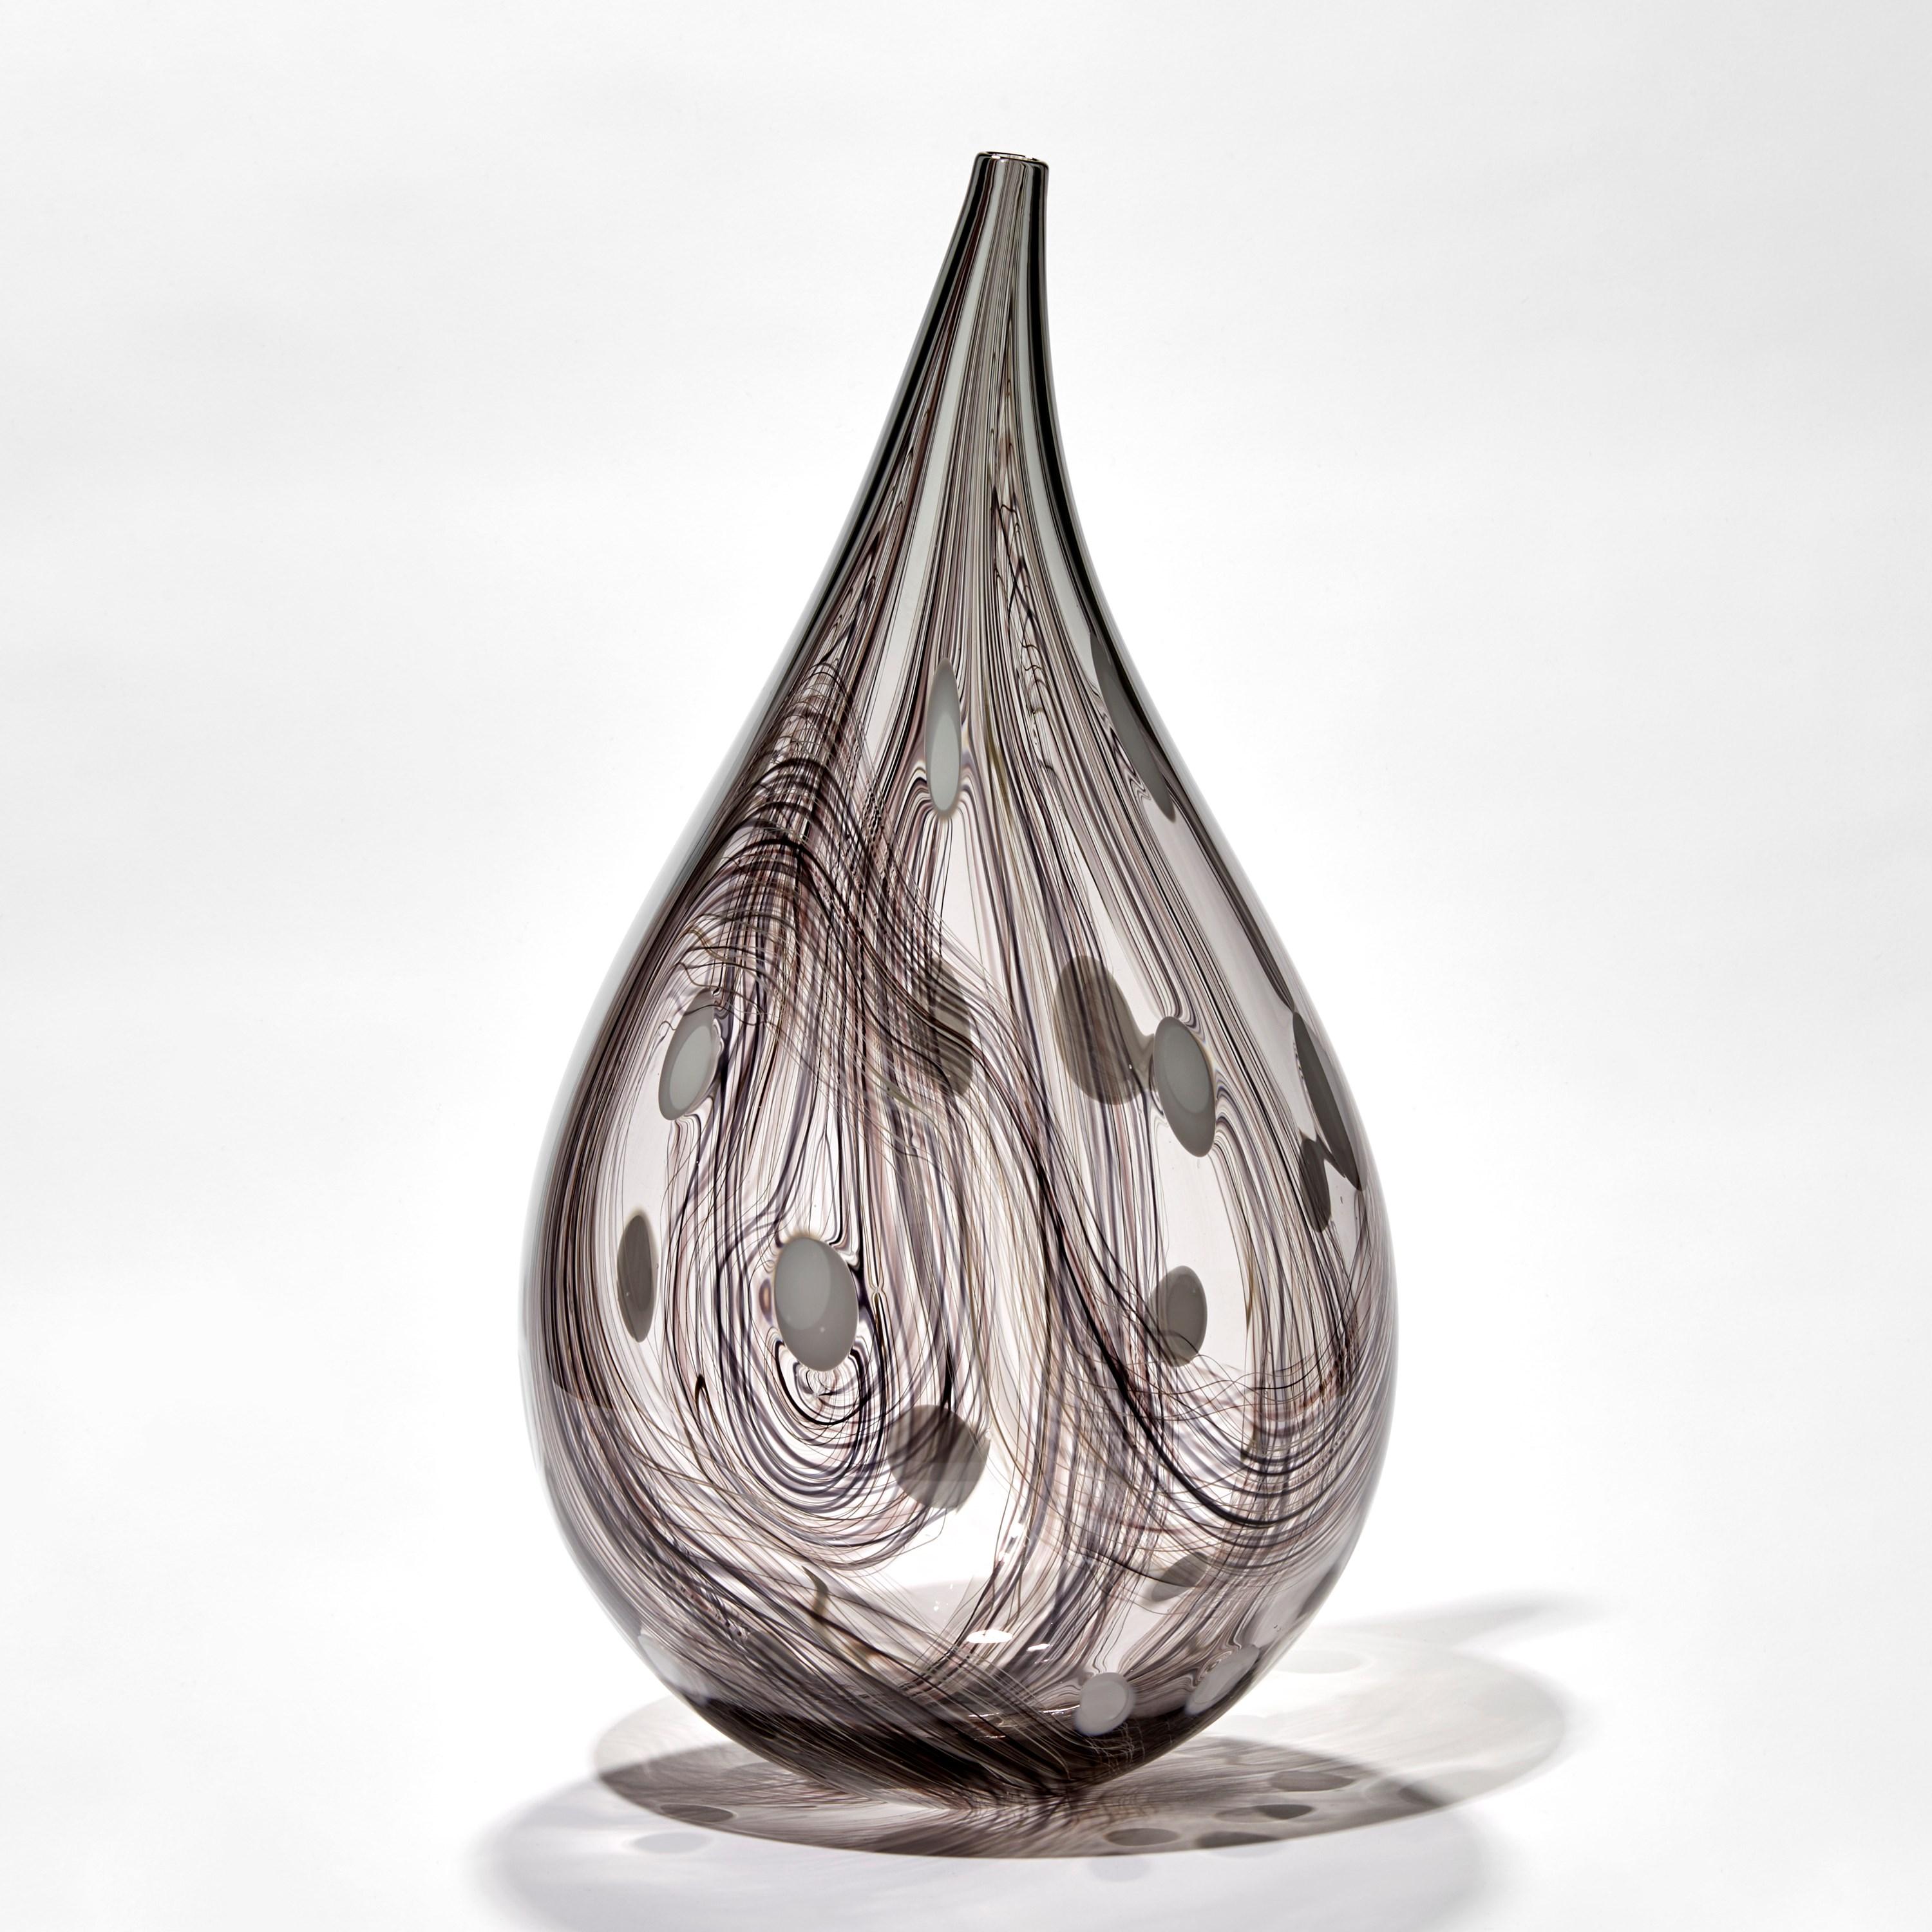 'Threads III' is a unique glass artwork by the Swedish artist, Ann Wåhlström.

In her career, Wåhlström has designed wares for many international companies; glasses for the likes of Ikea and Kosta Boda, ceramics, metals and textiles for brands